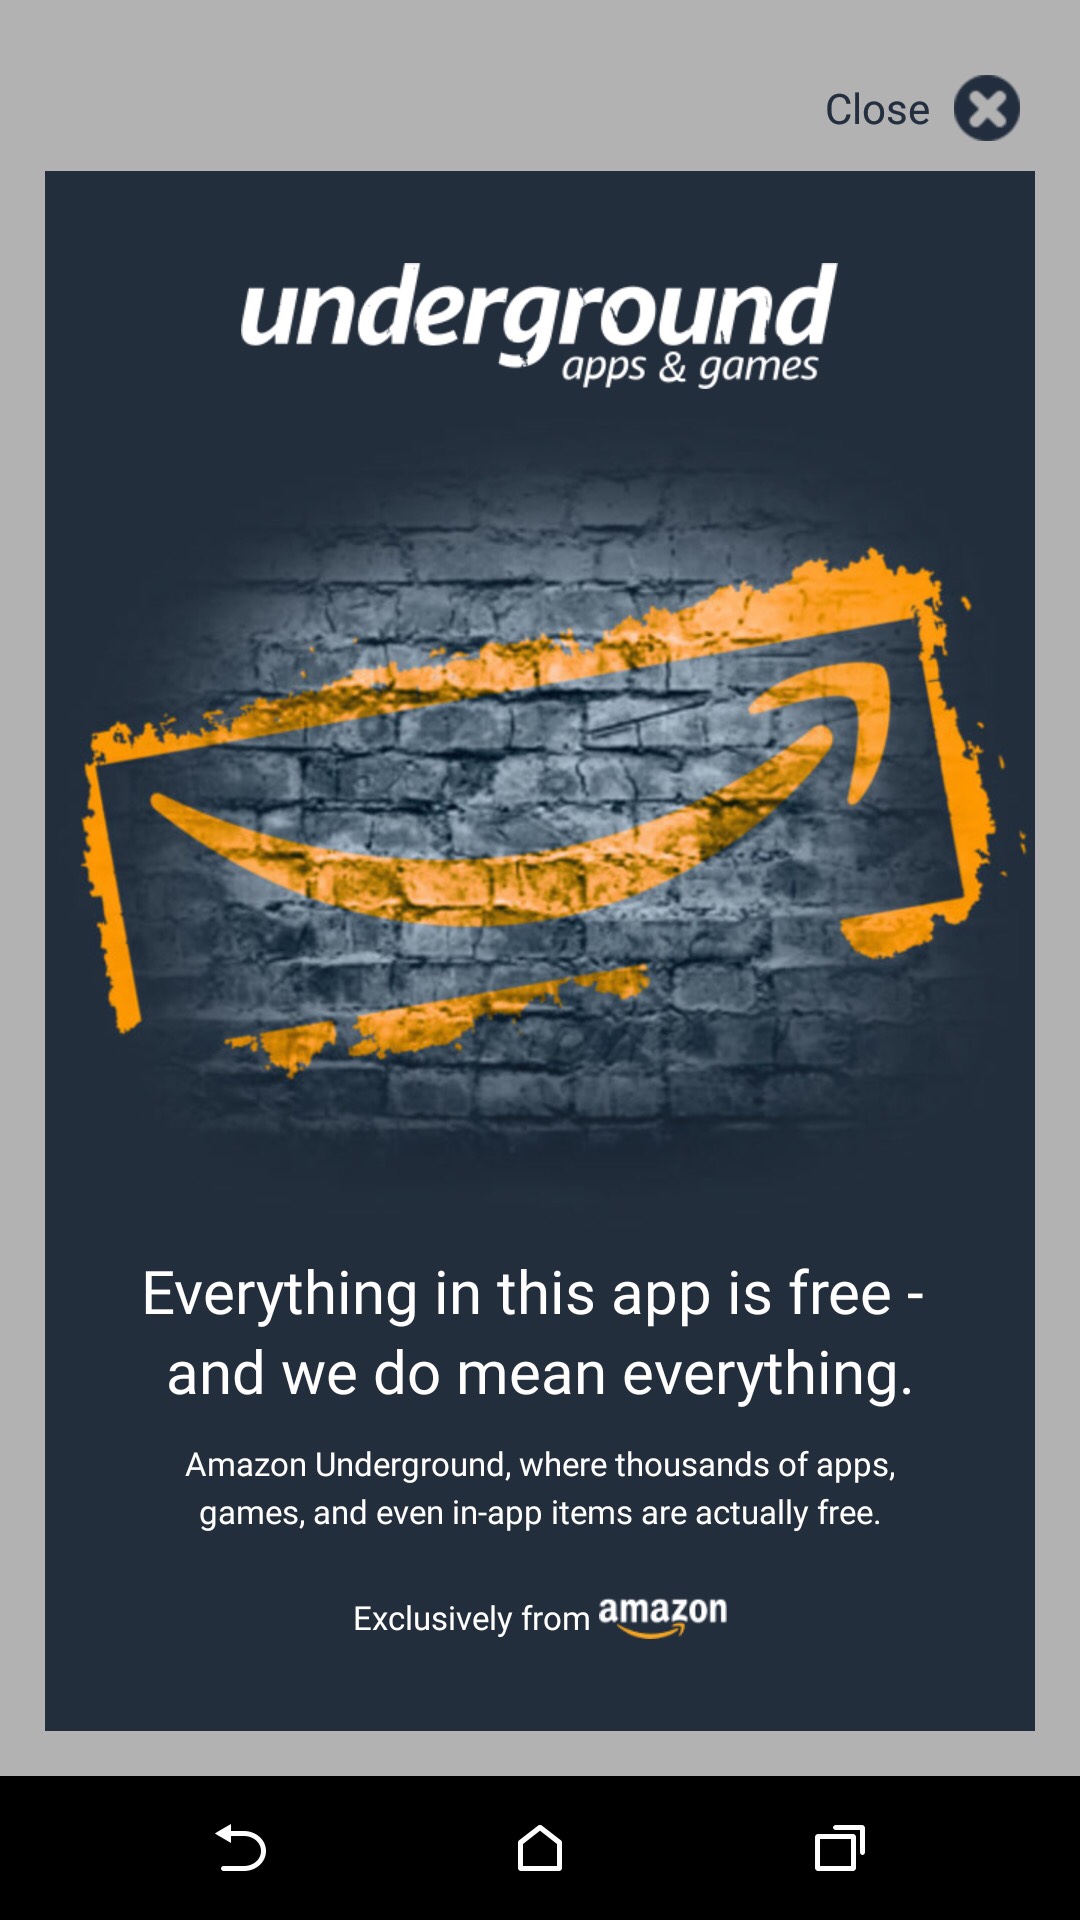 Amazon Underground Aims to Deliver Truly Free Apps